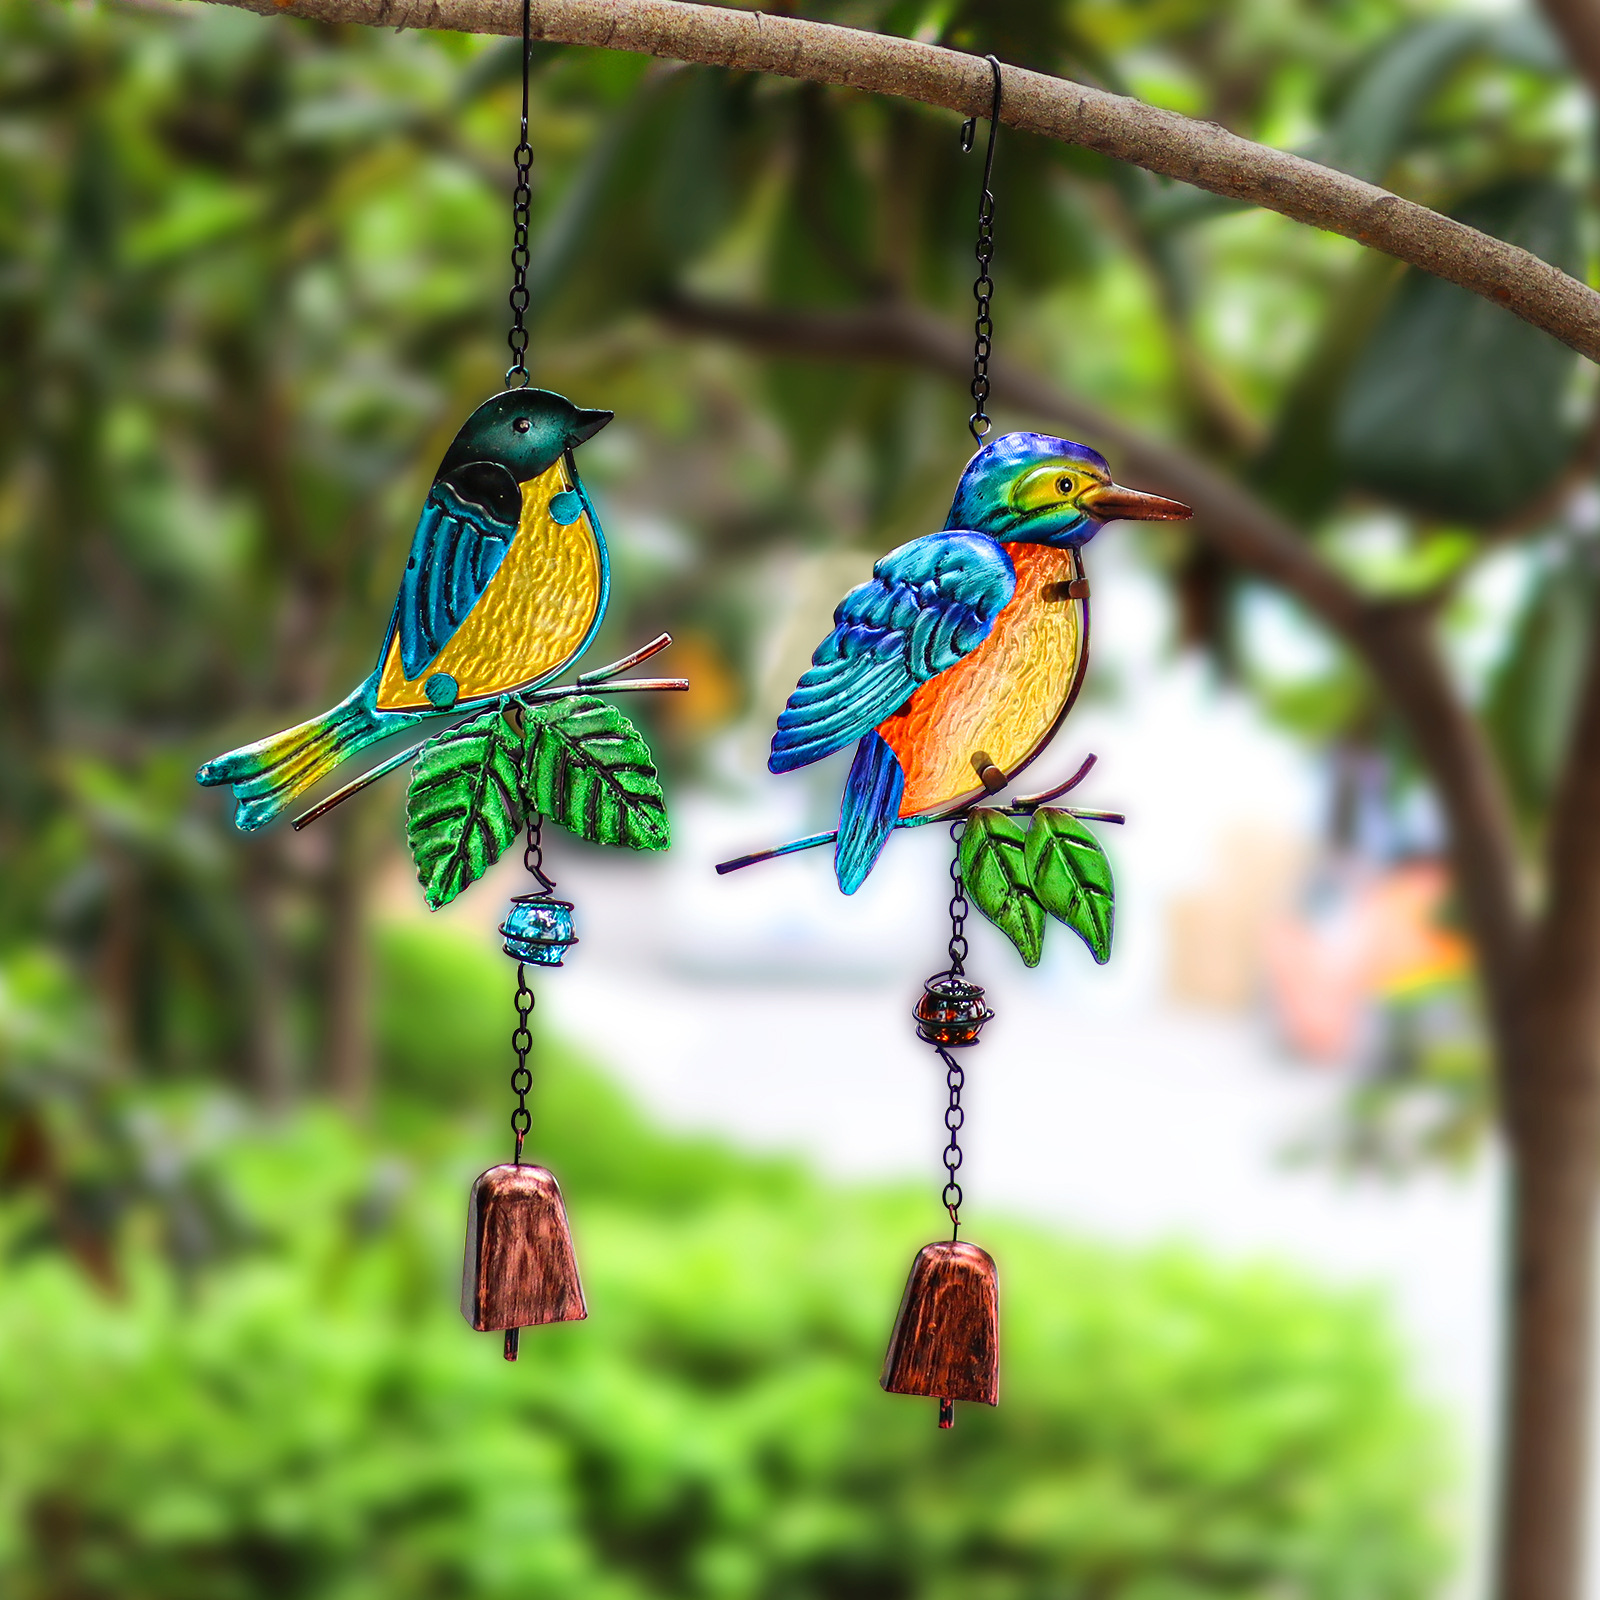 【Christmas Promotion 50% OFF】2 Pcs Bird Bell Wind Chimes